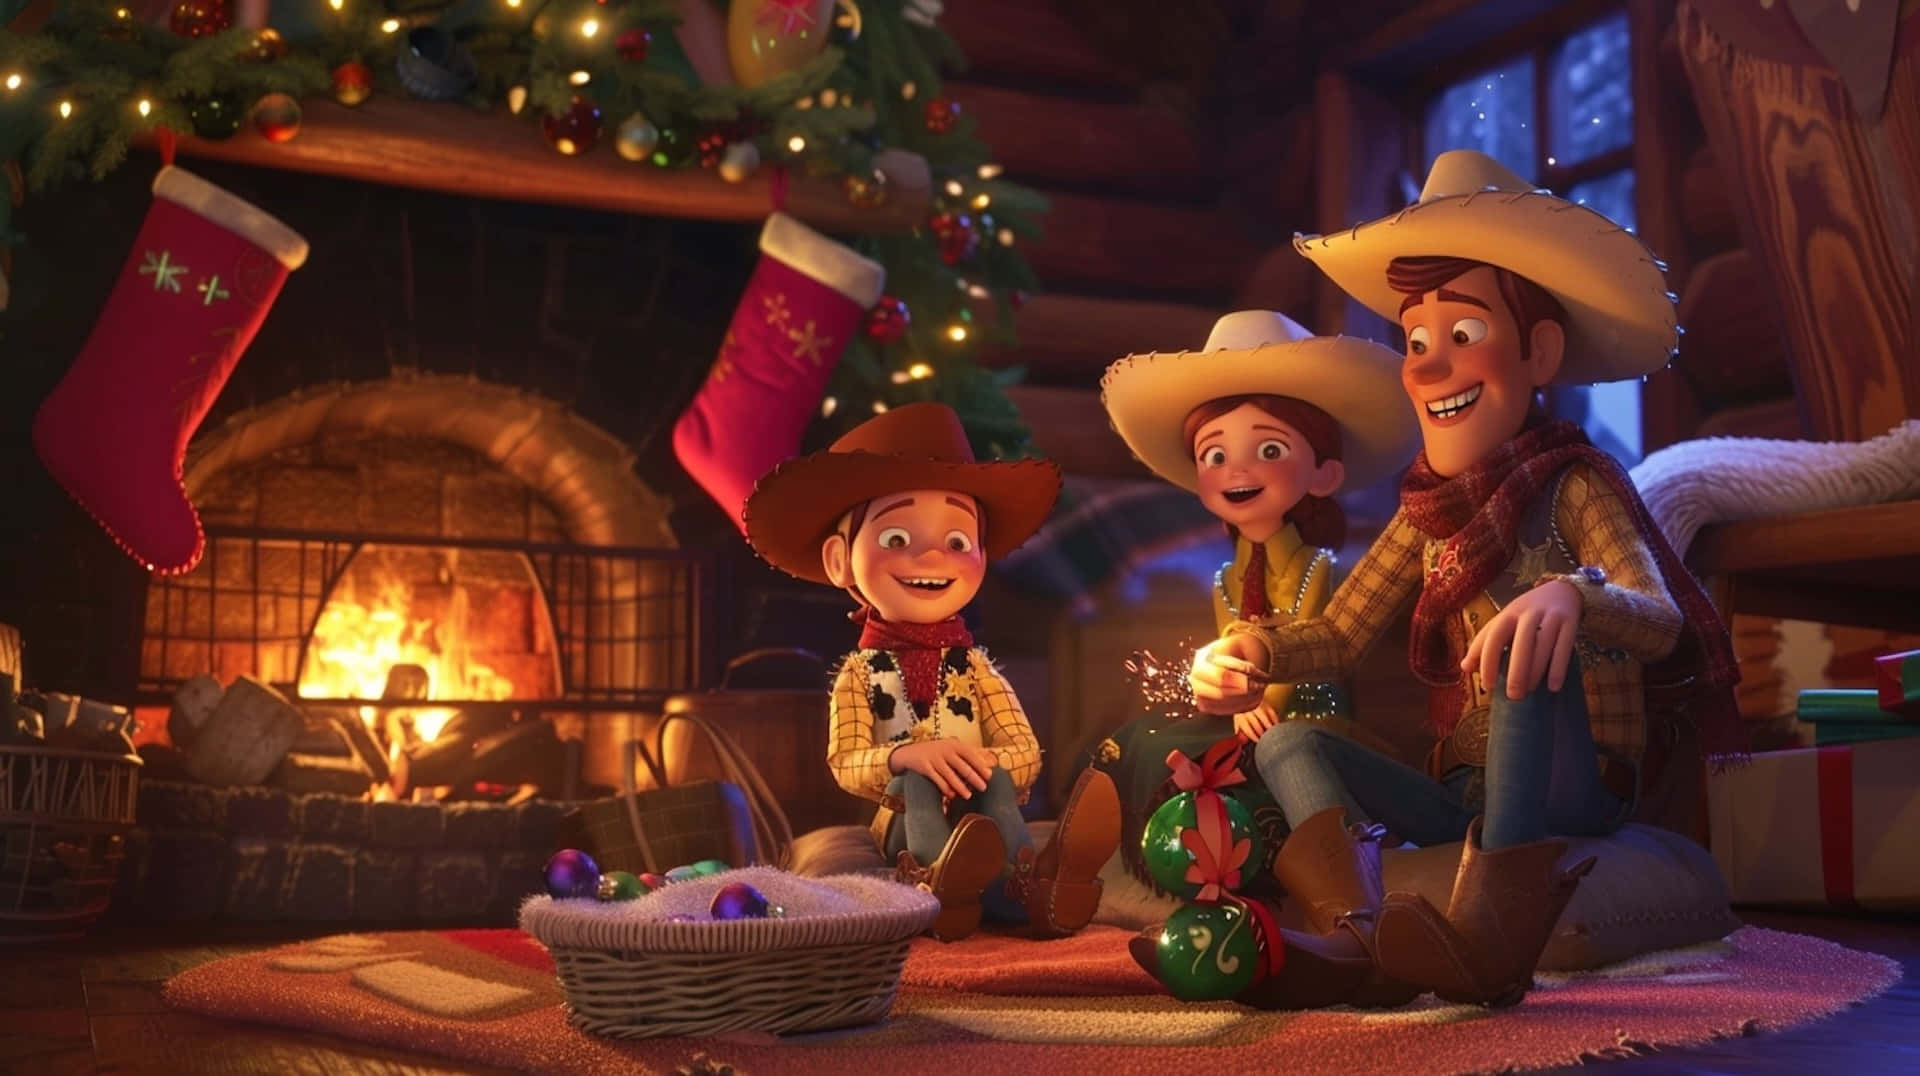 Animated Christmas Celebration With Toy Characters Wallpaper